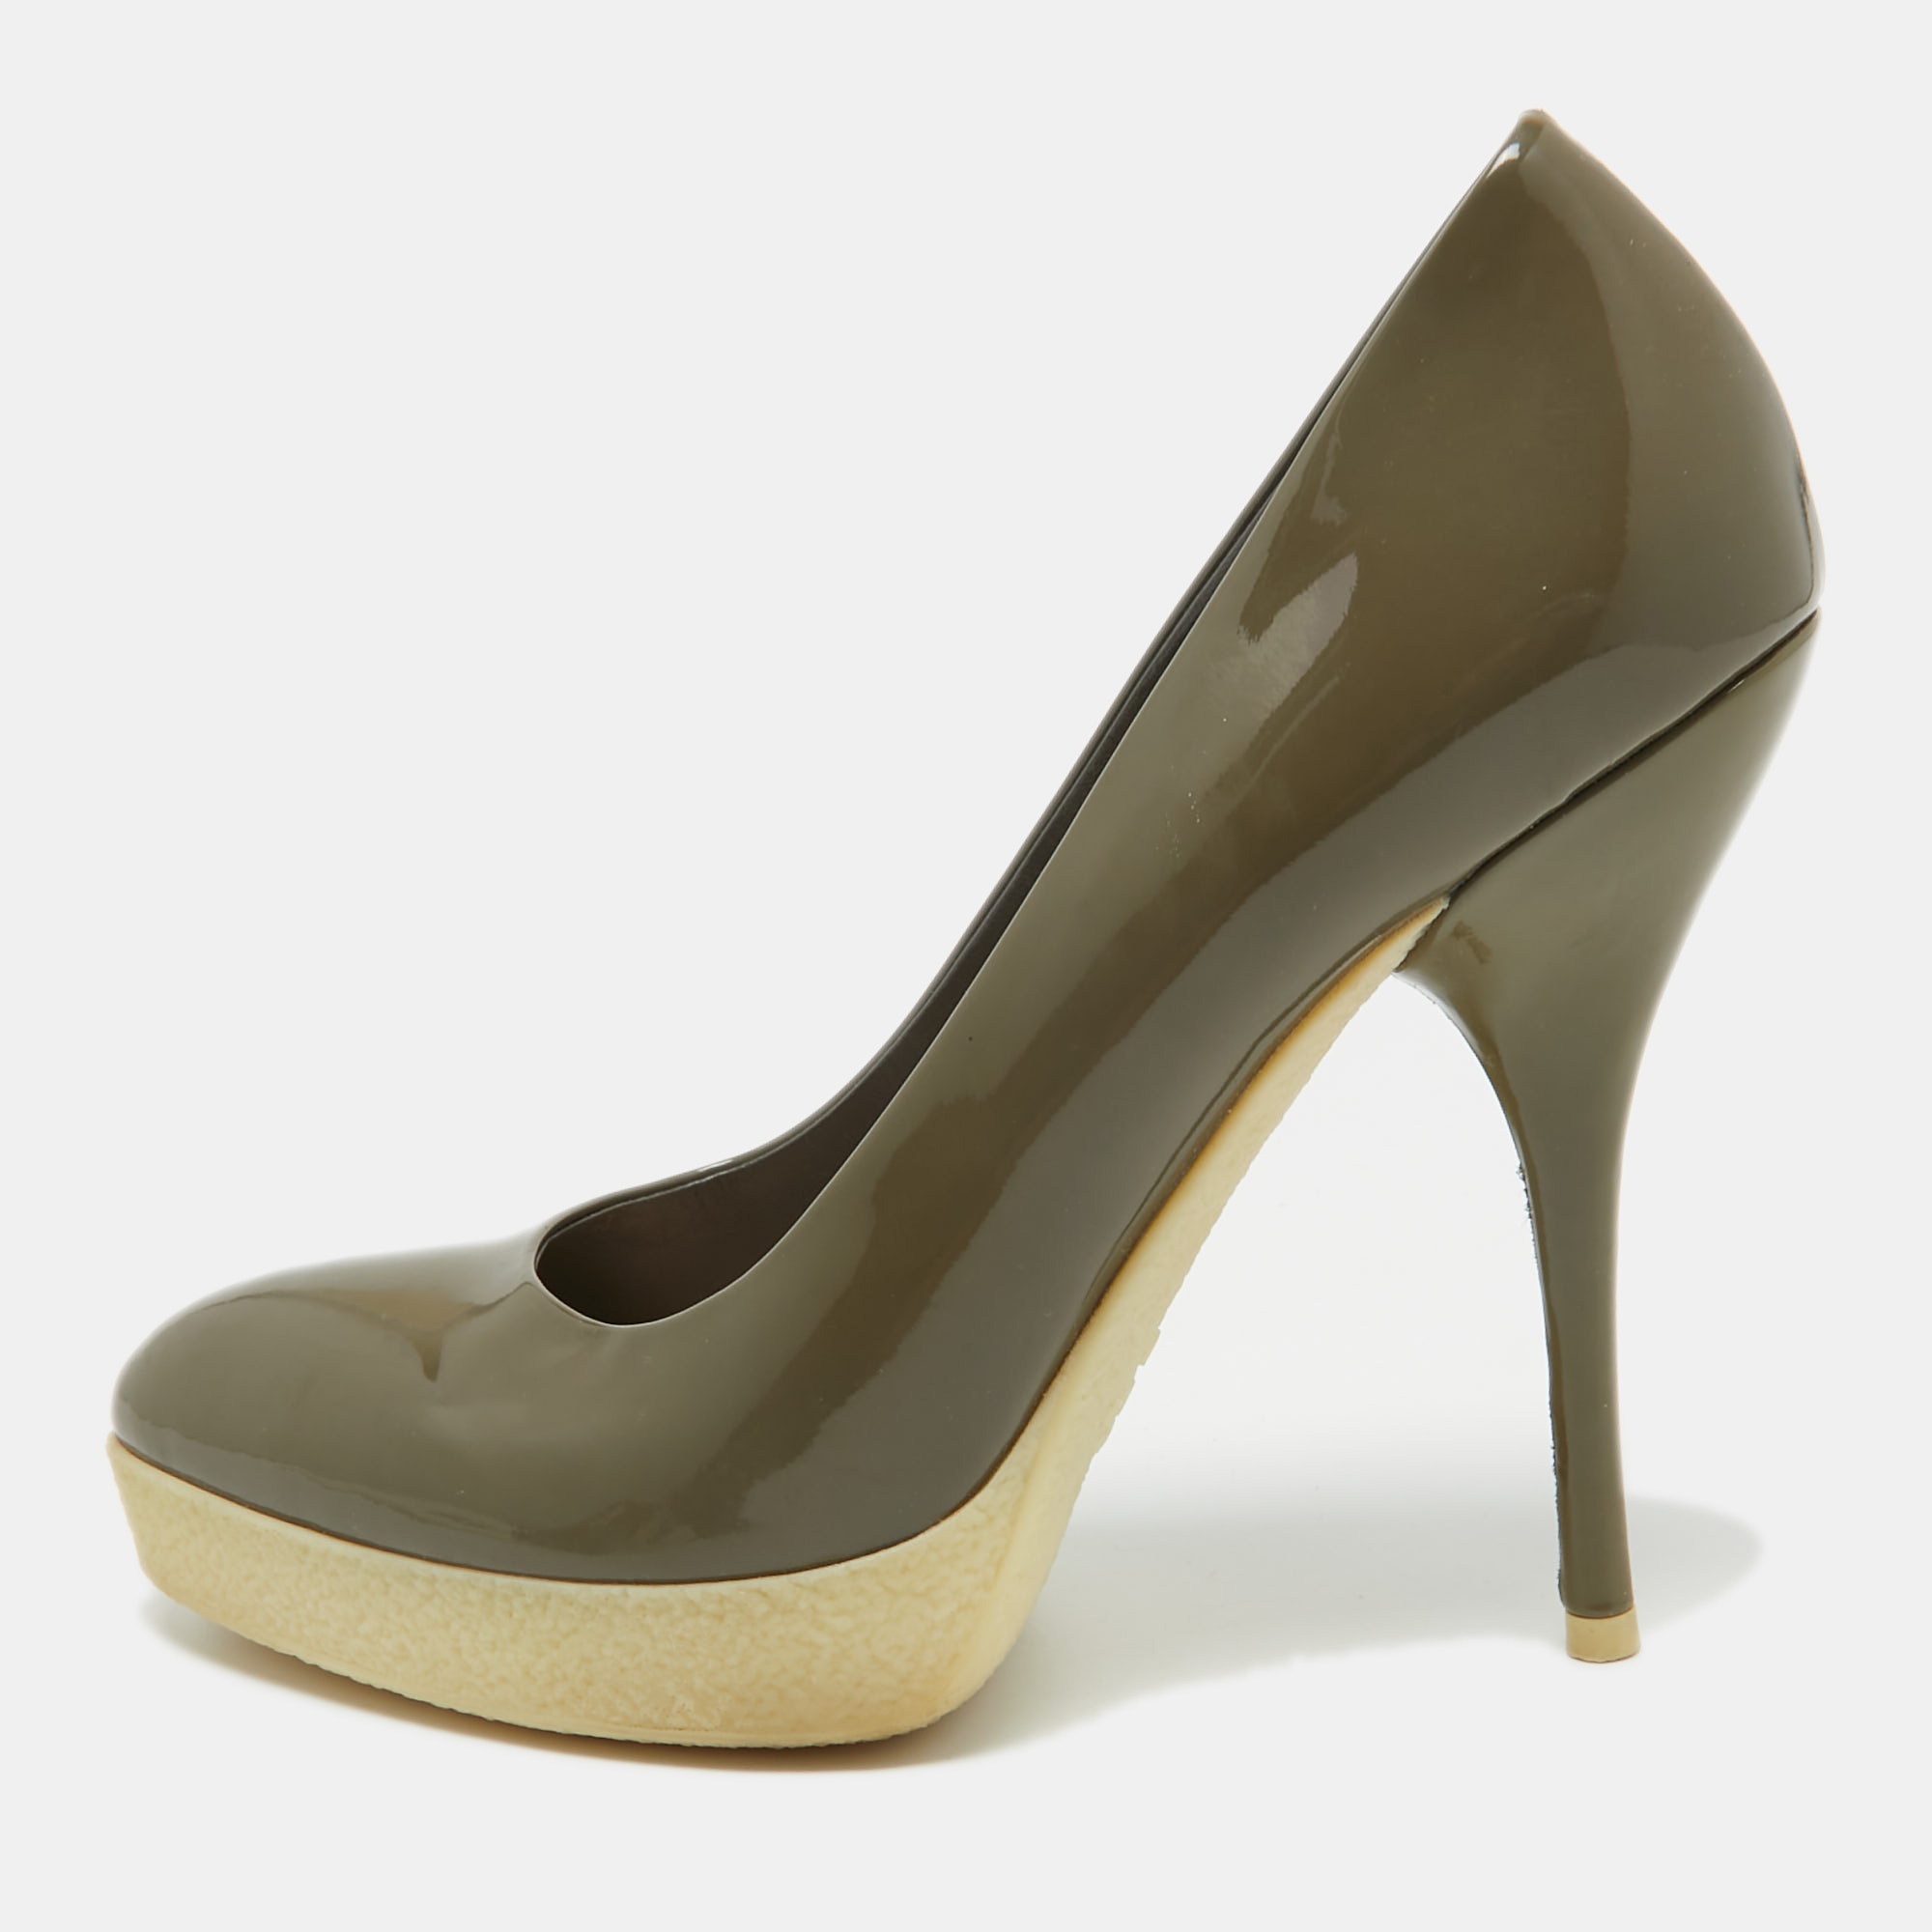 Pre-owned Gucci Olive Green Patent Leather Platform Pumps Size 36